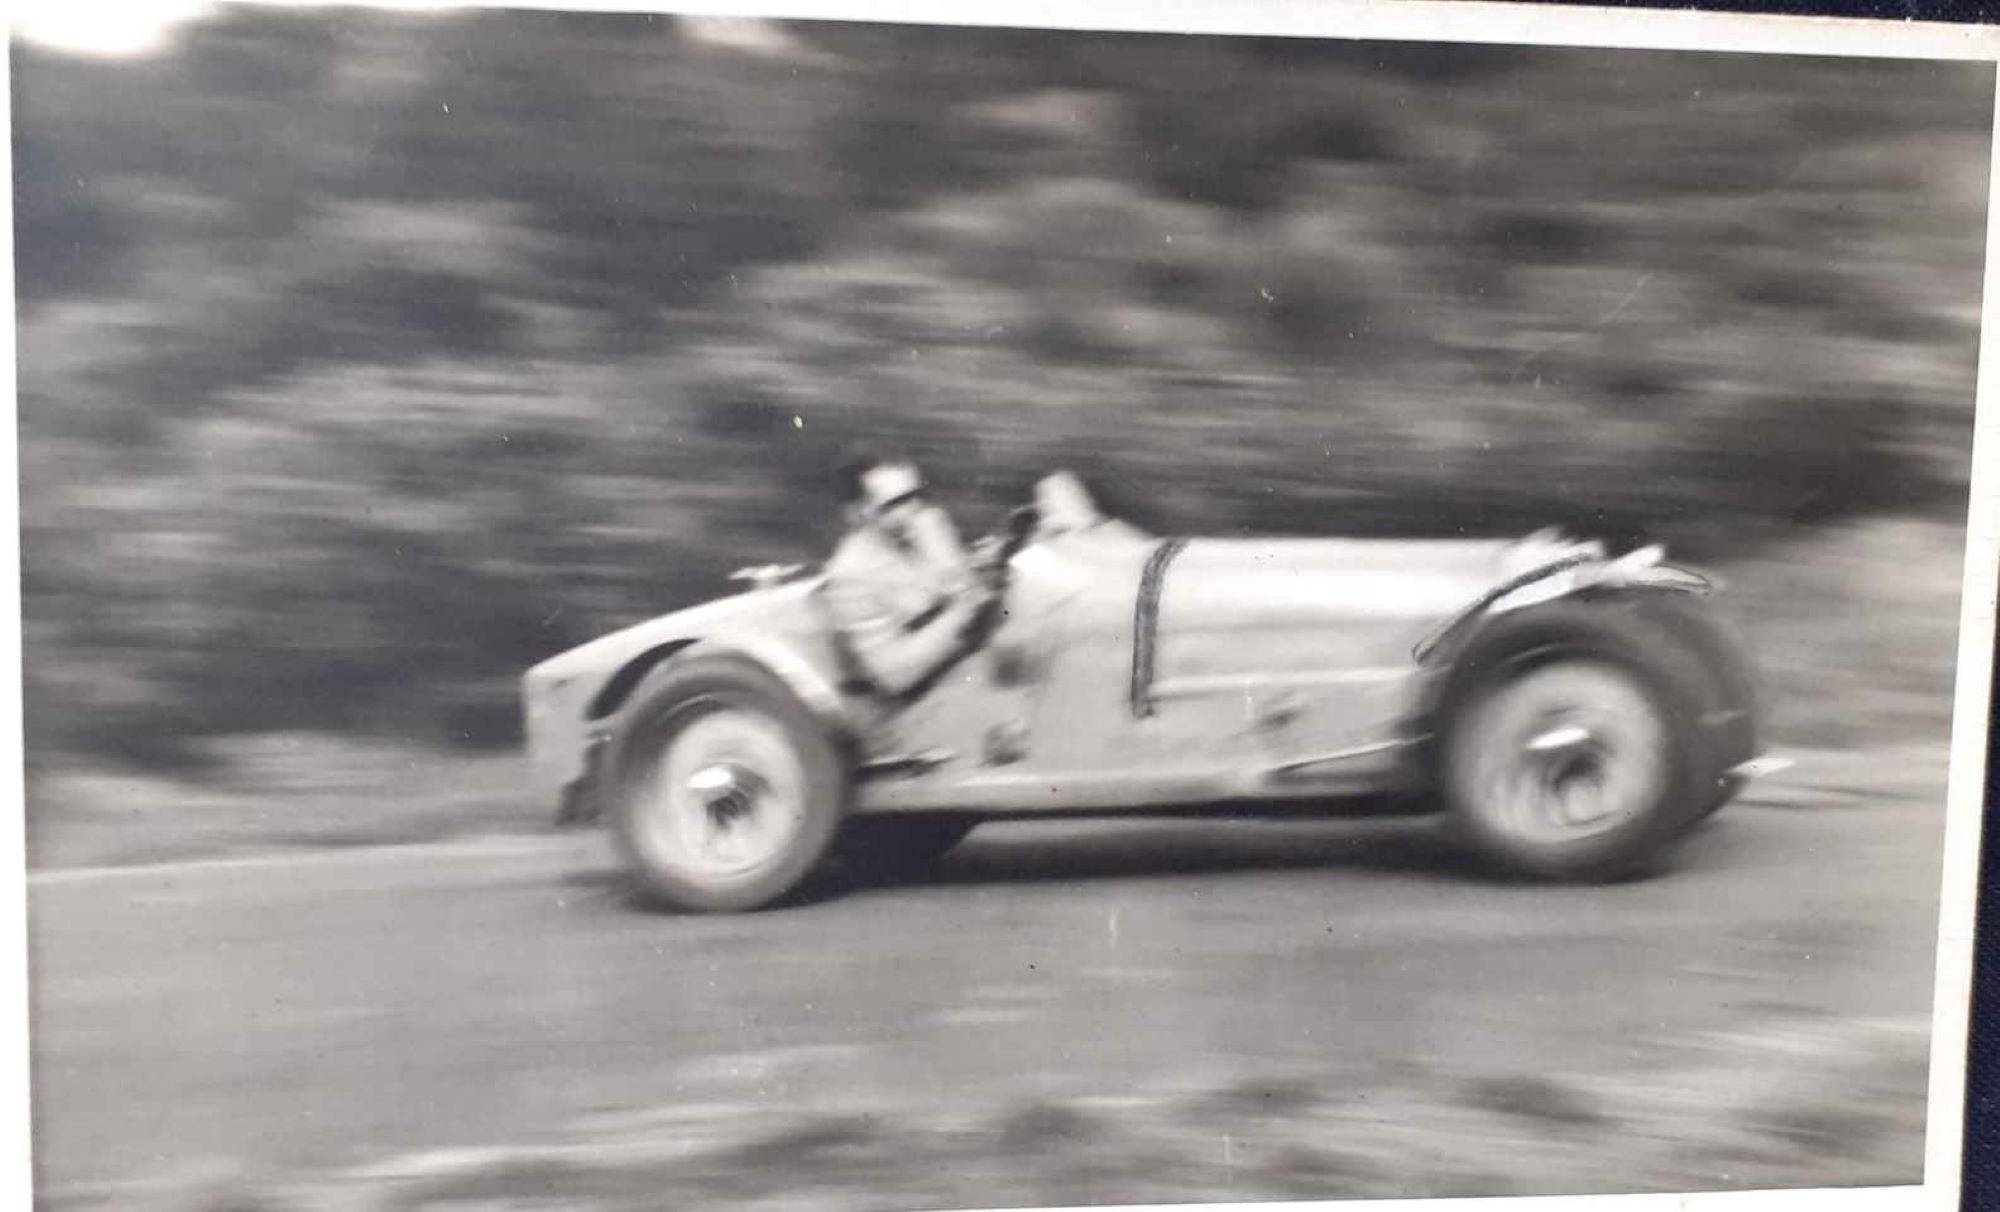 Name:  NSCC 1950 #0116 Bugatti T35 at speed - light colour 1950's - image Graeme Wells arch Anthony Wel.jpg
Views: 217
Size:  158.1 KB